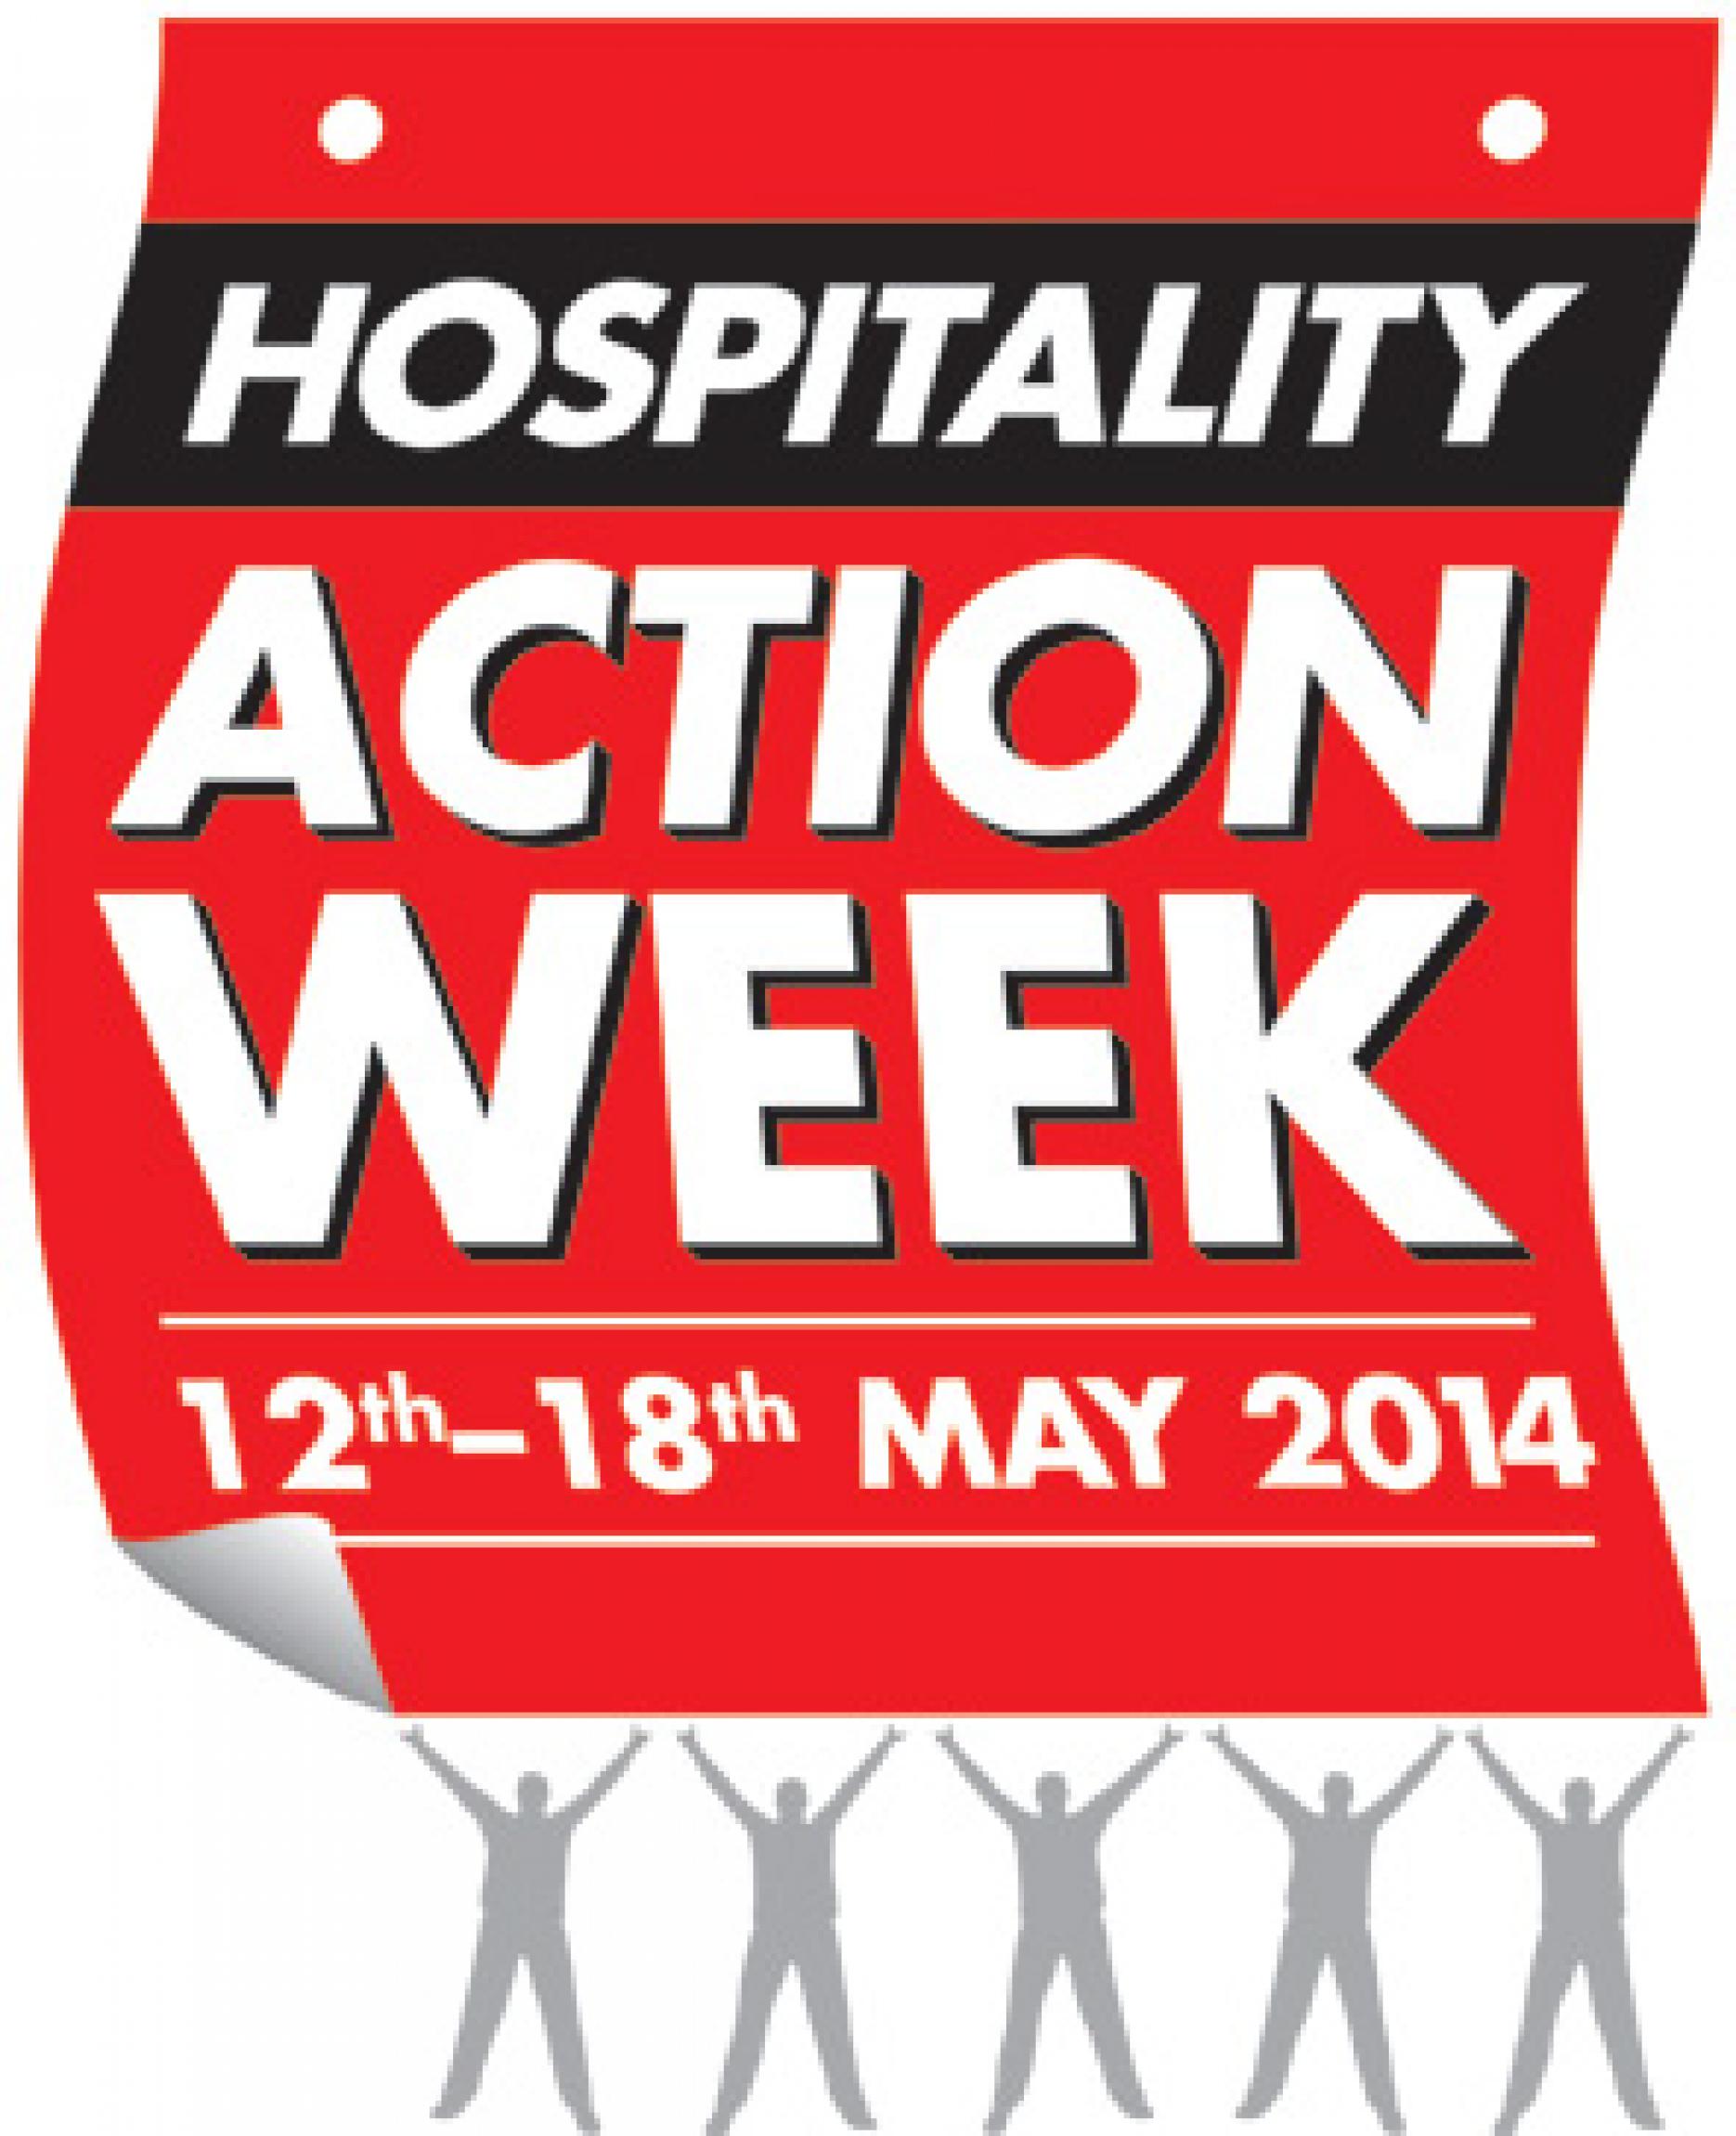 Hospitality Action takes place 